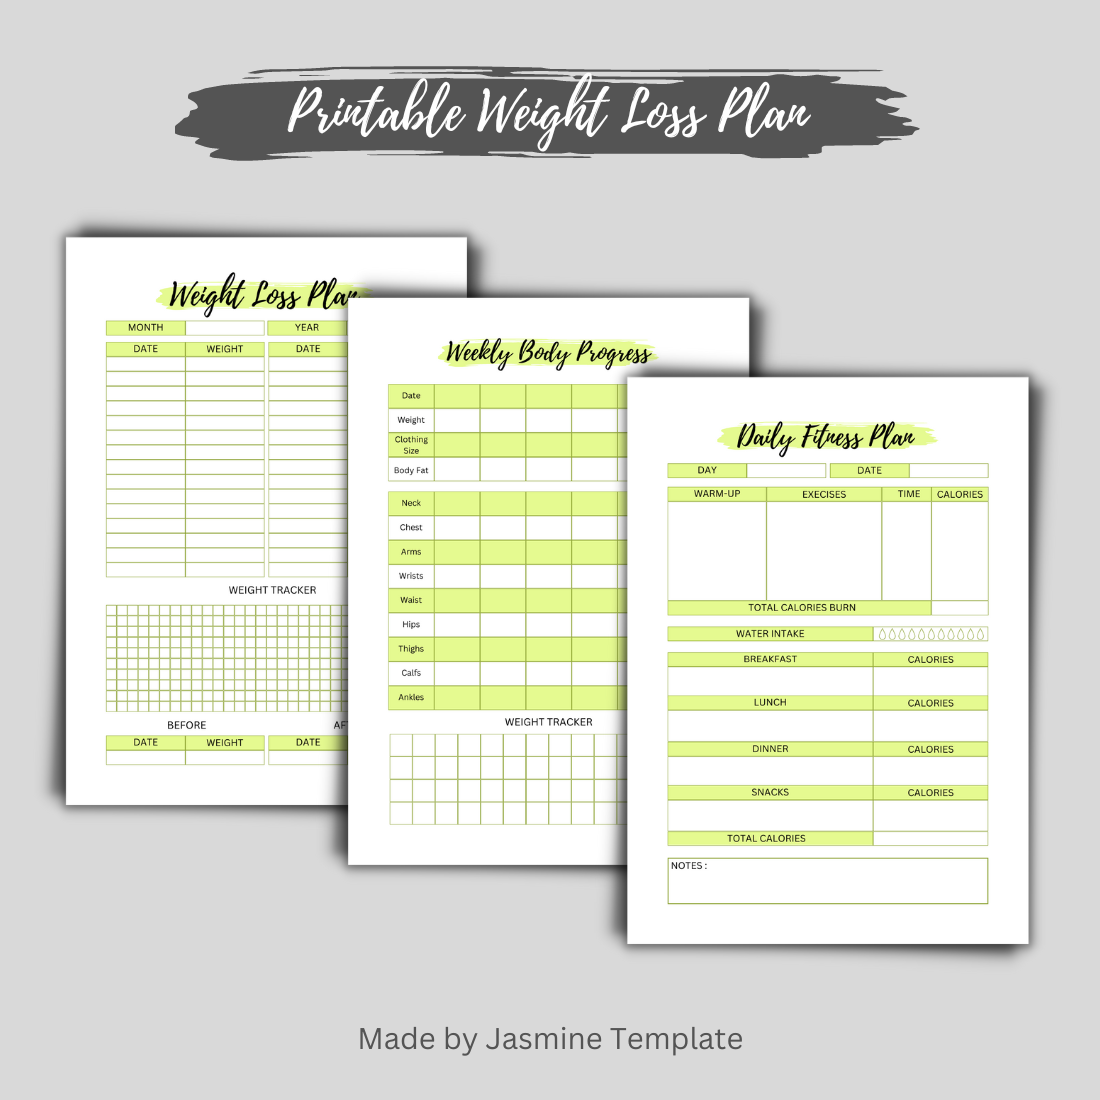 Printable Personal Weight Loss Planner cover image.